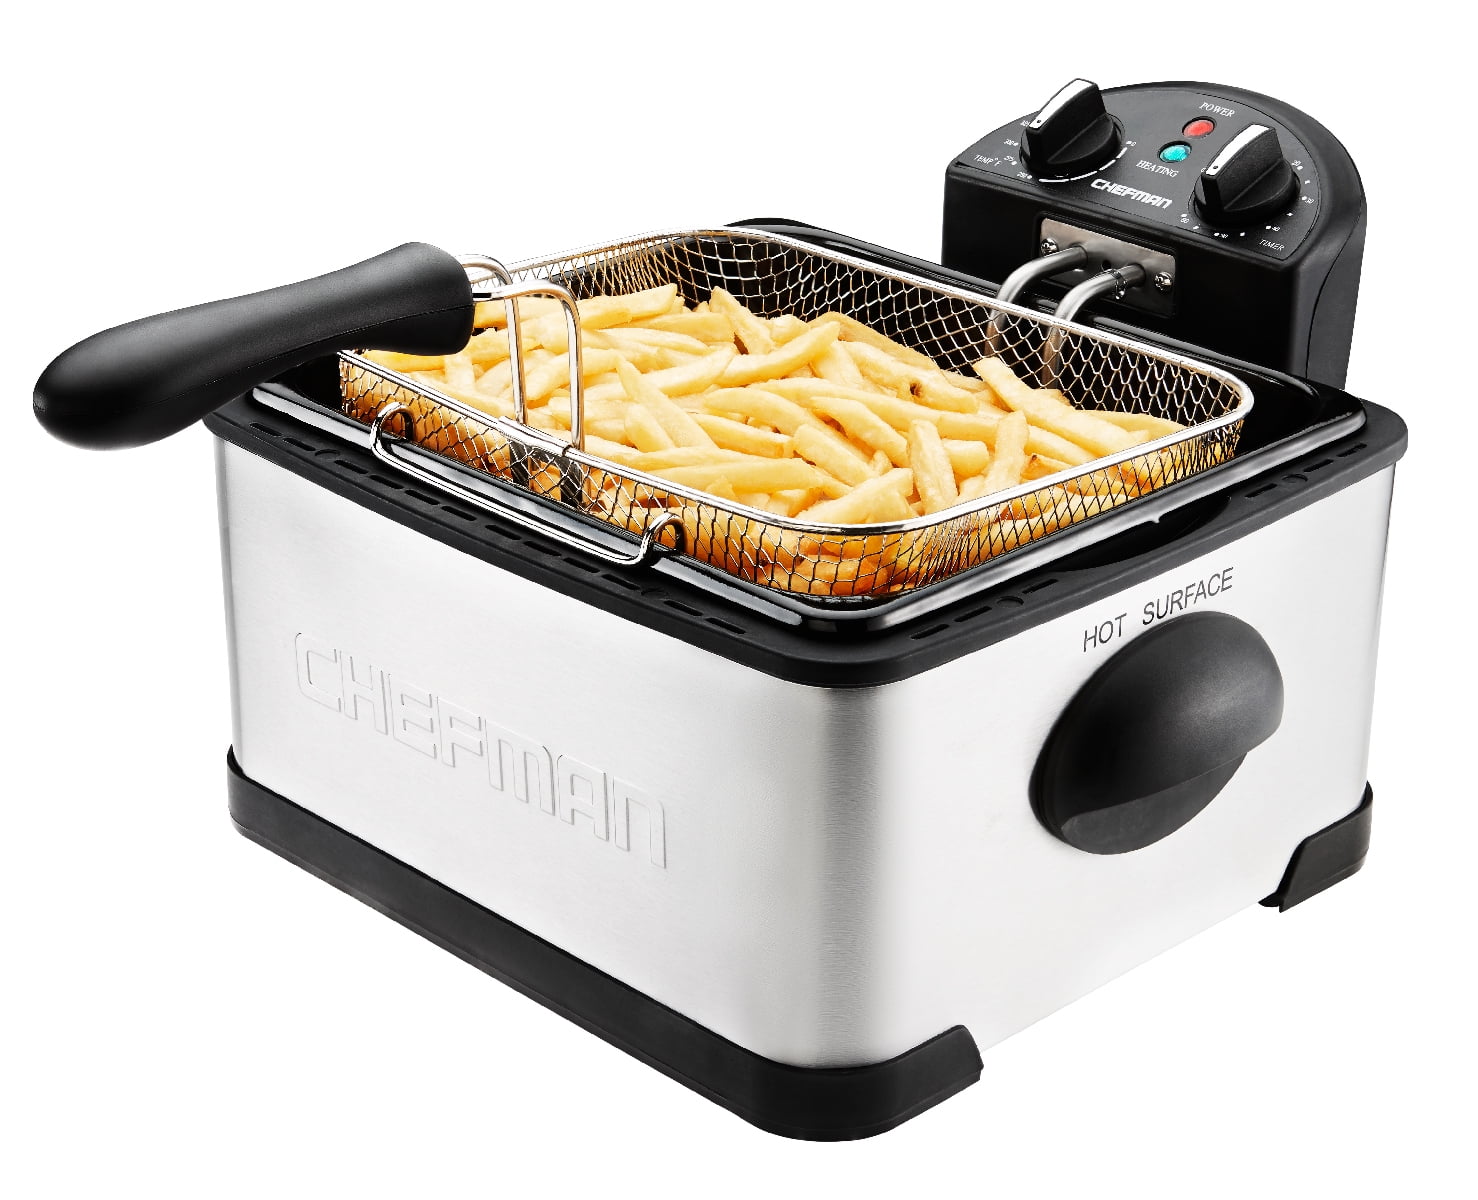 VIVOHOME 20.7 qt. Silver Electric Deep Fryer with 60-Min Timer and